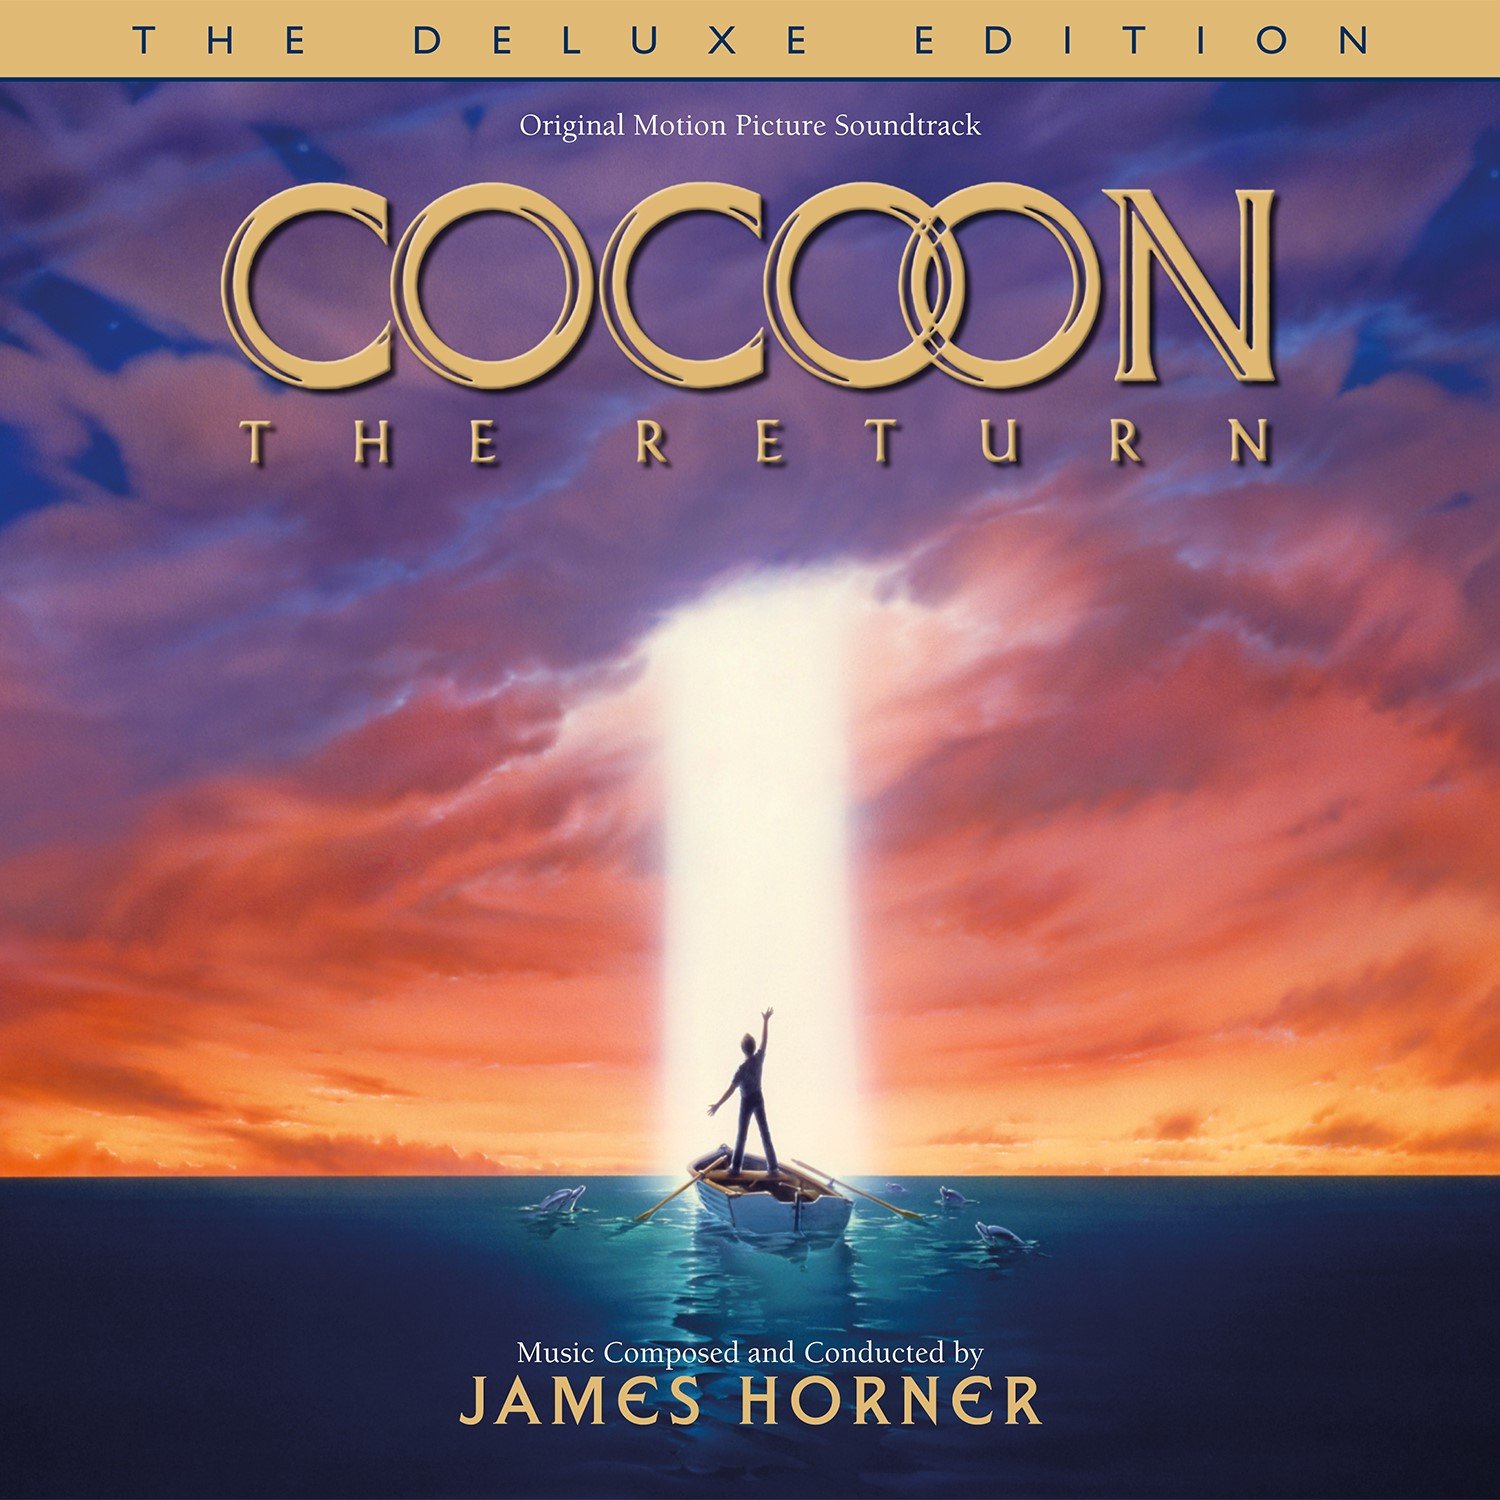 Cocoon: The Return - The Deluxe Edition | Varèse Sarabande